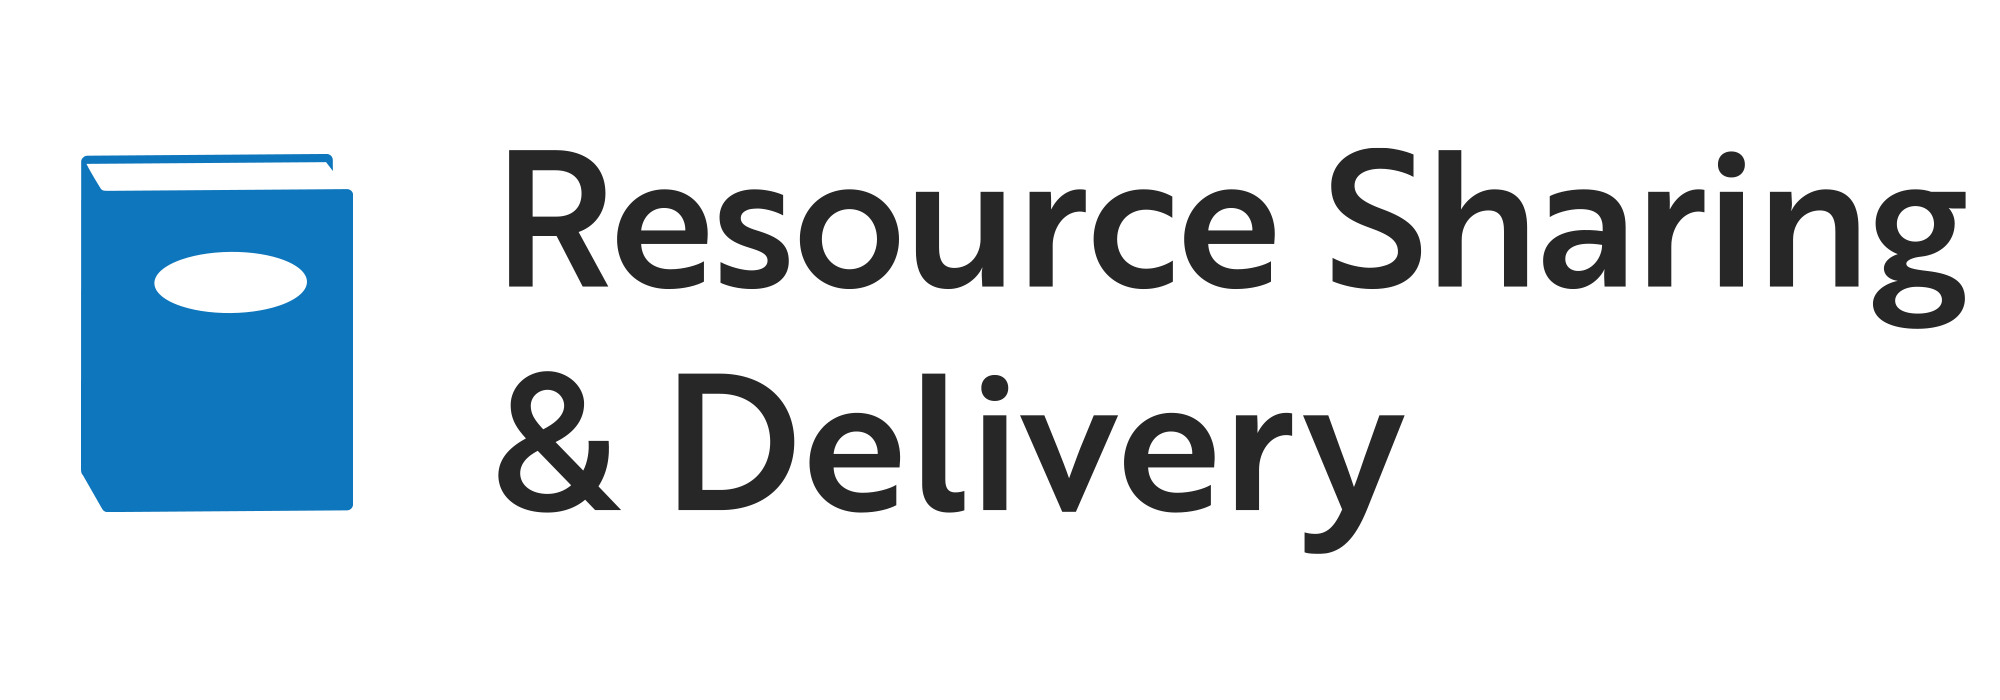 Resource Sharing & Delivery logo.